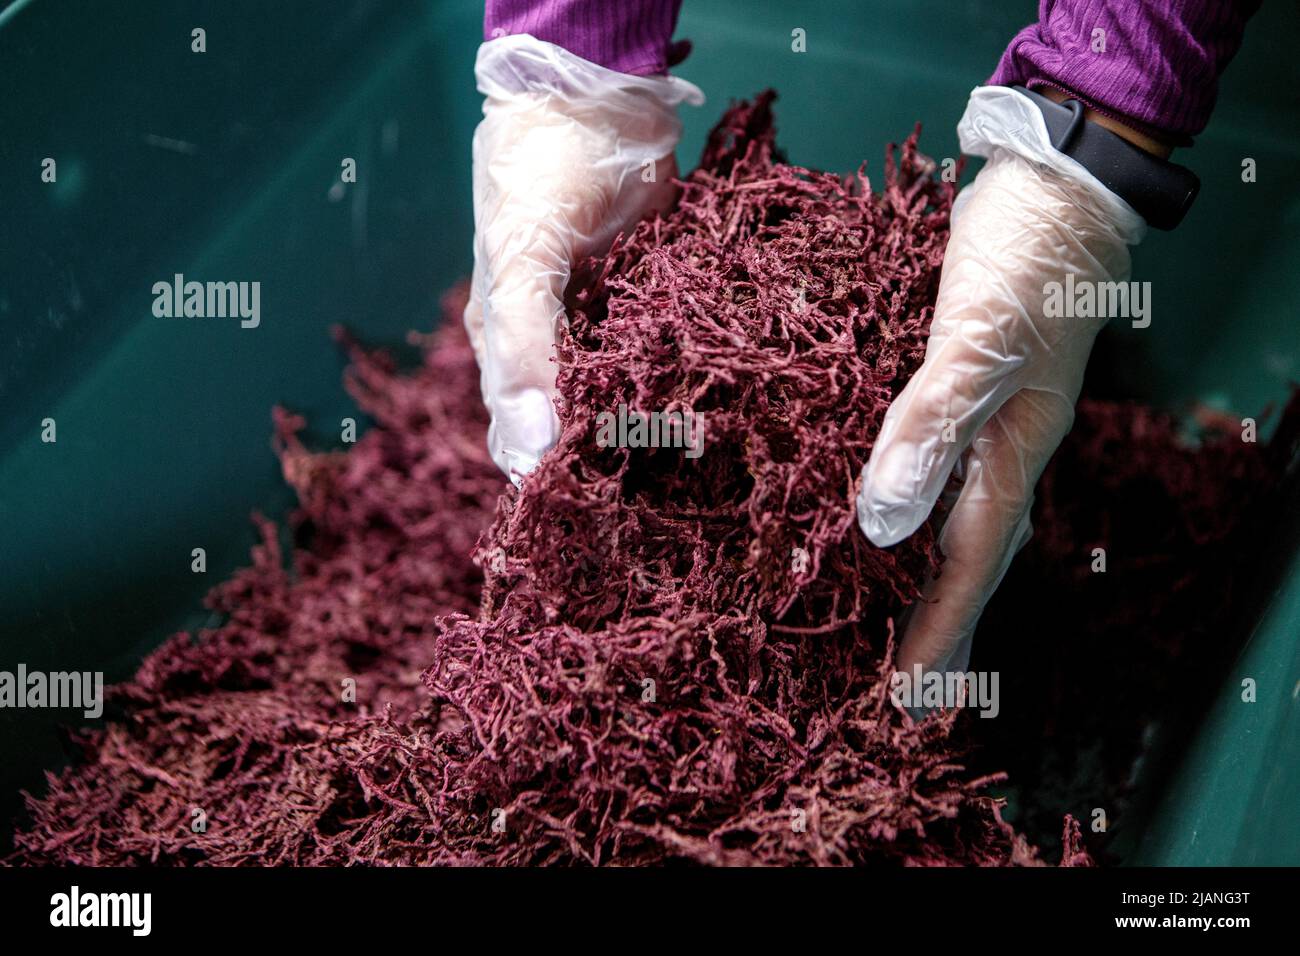 TIACHIV, UKRAINE - MAY 28, 2022 - A person in plastic gloves holds grated dry beetroot as volunteers make Chornobaivka dry borscht kits for the Ukrain Stock Photo